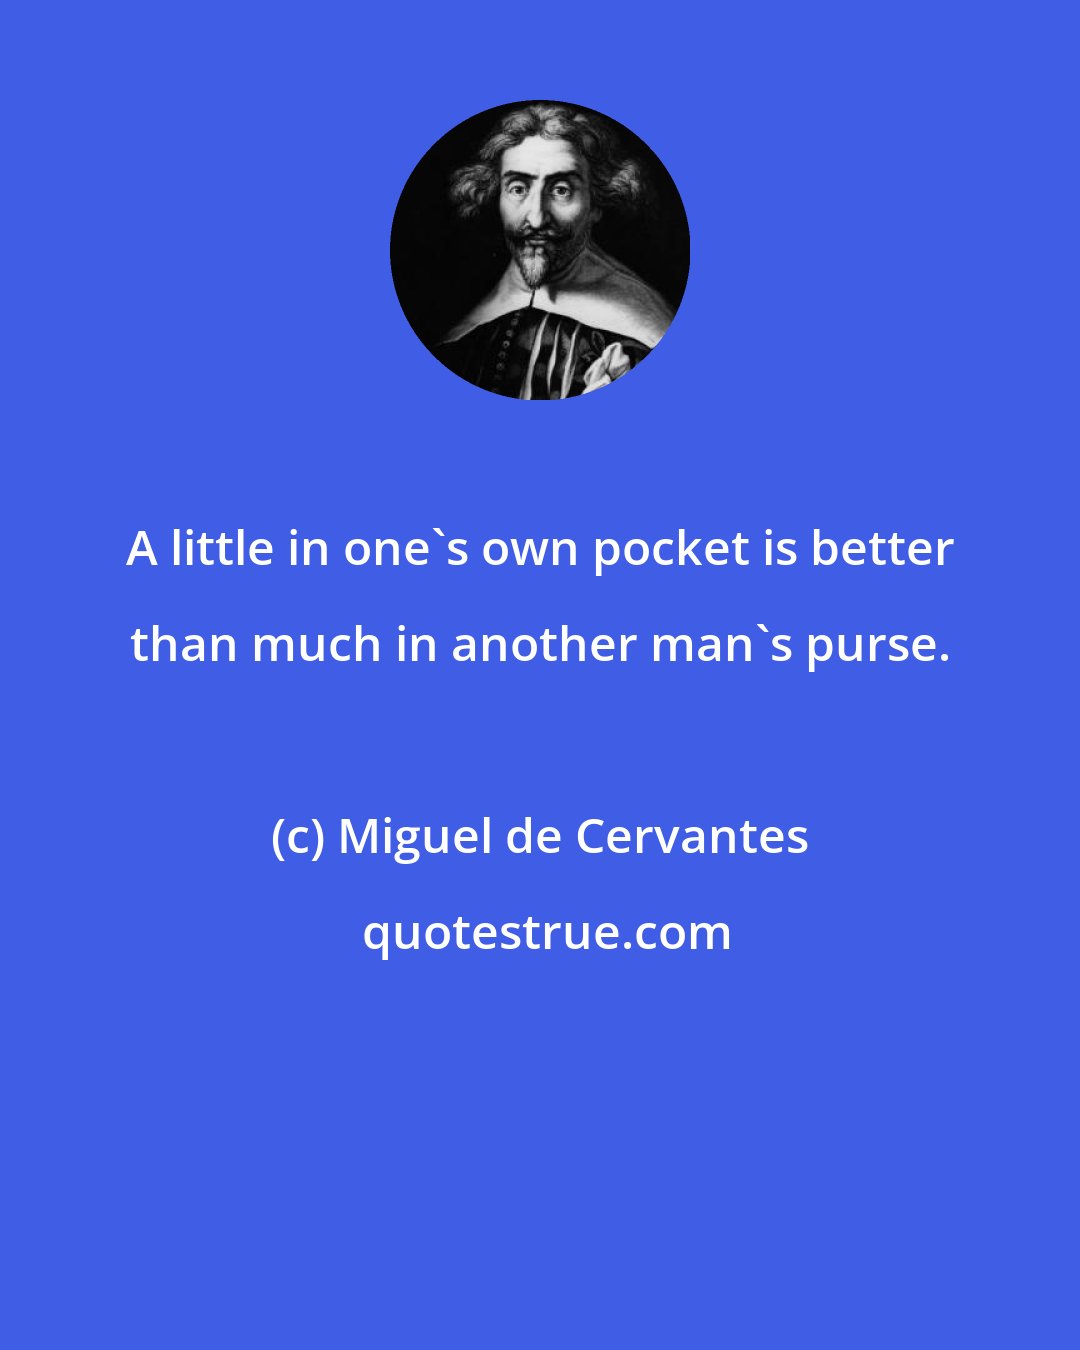 Miguel de Cervantes: A little in one's own pocket is better than much in another man's purse.